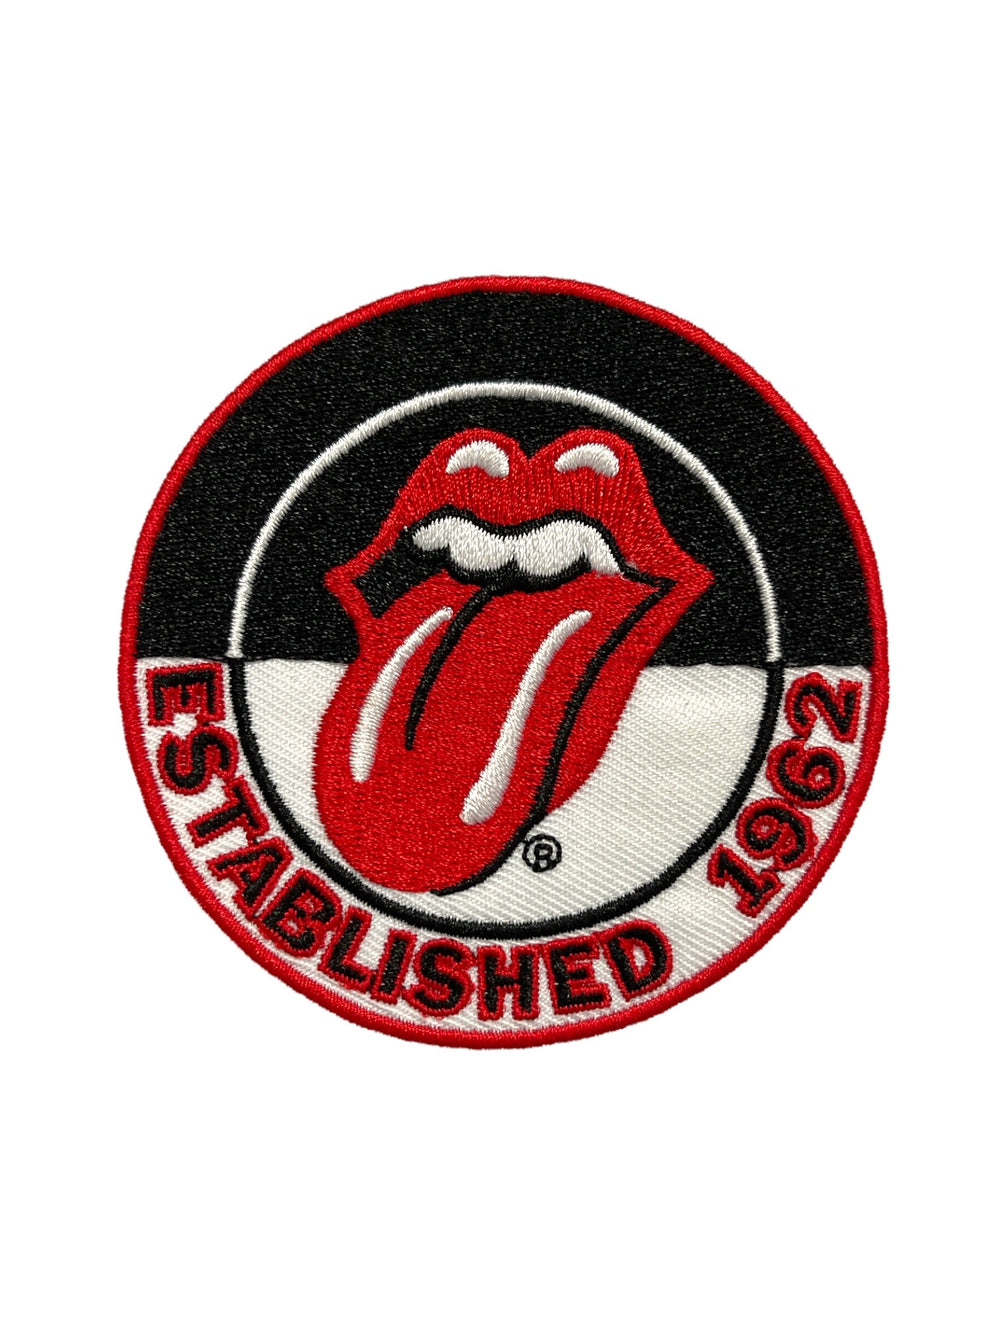 Rolling Stones The Established 1962 Version 2 Official Woven Patch Brand New